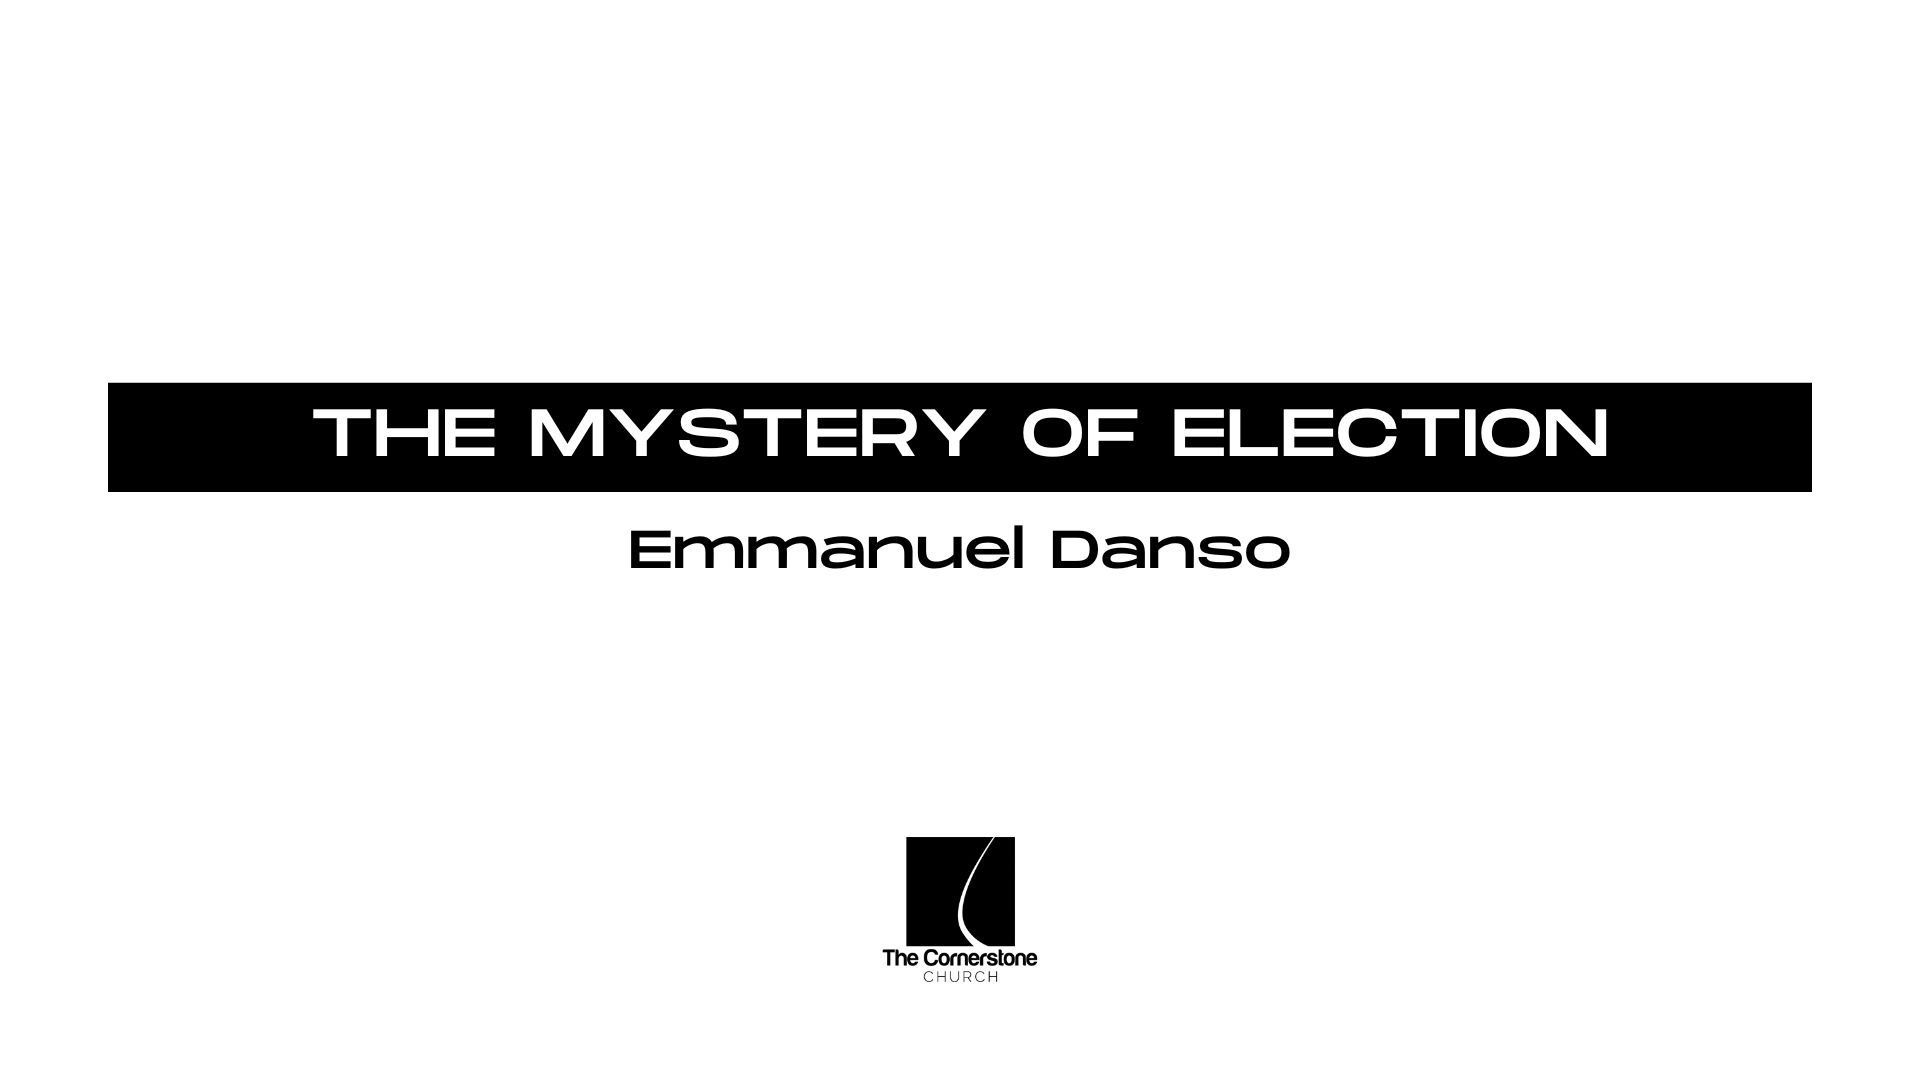 The Mystery of Election